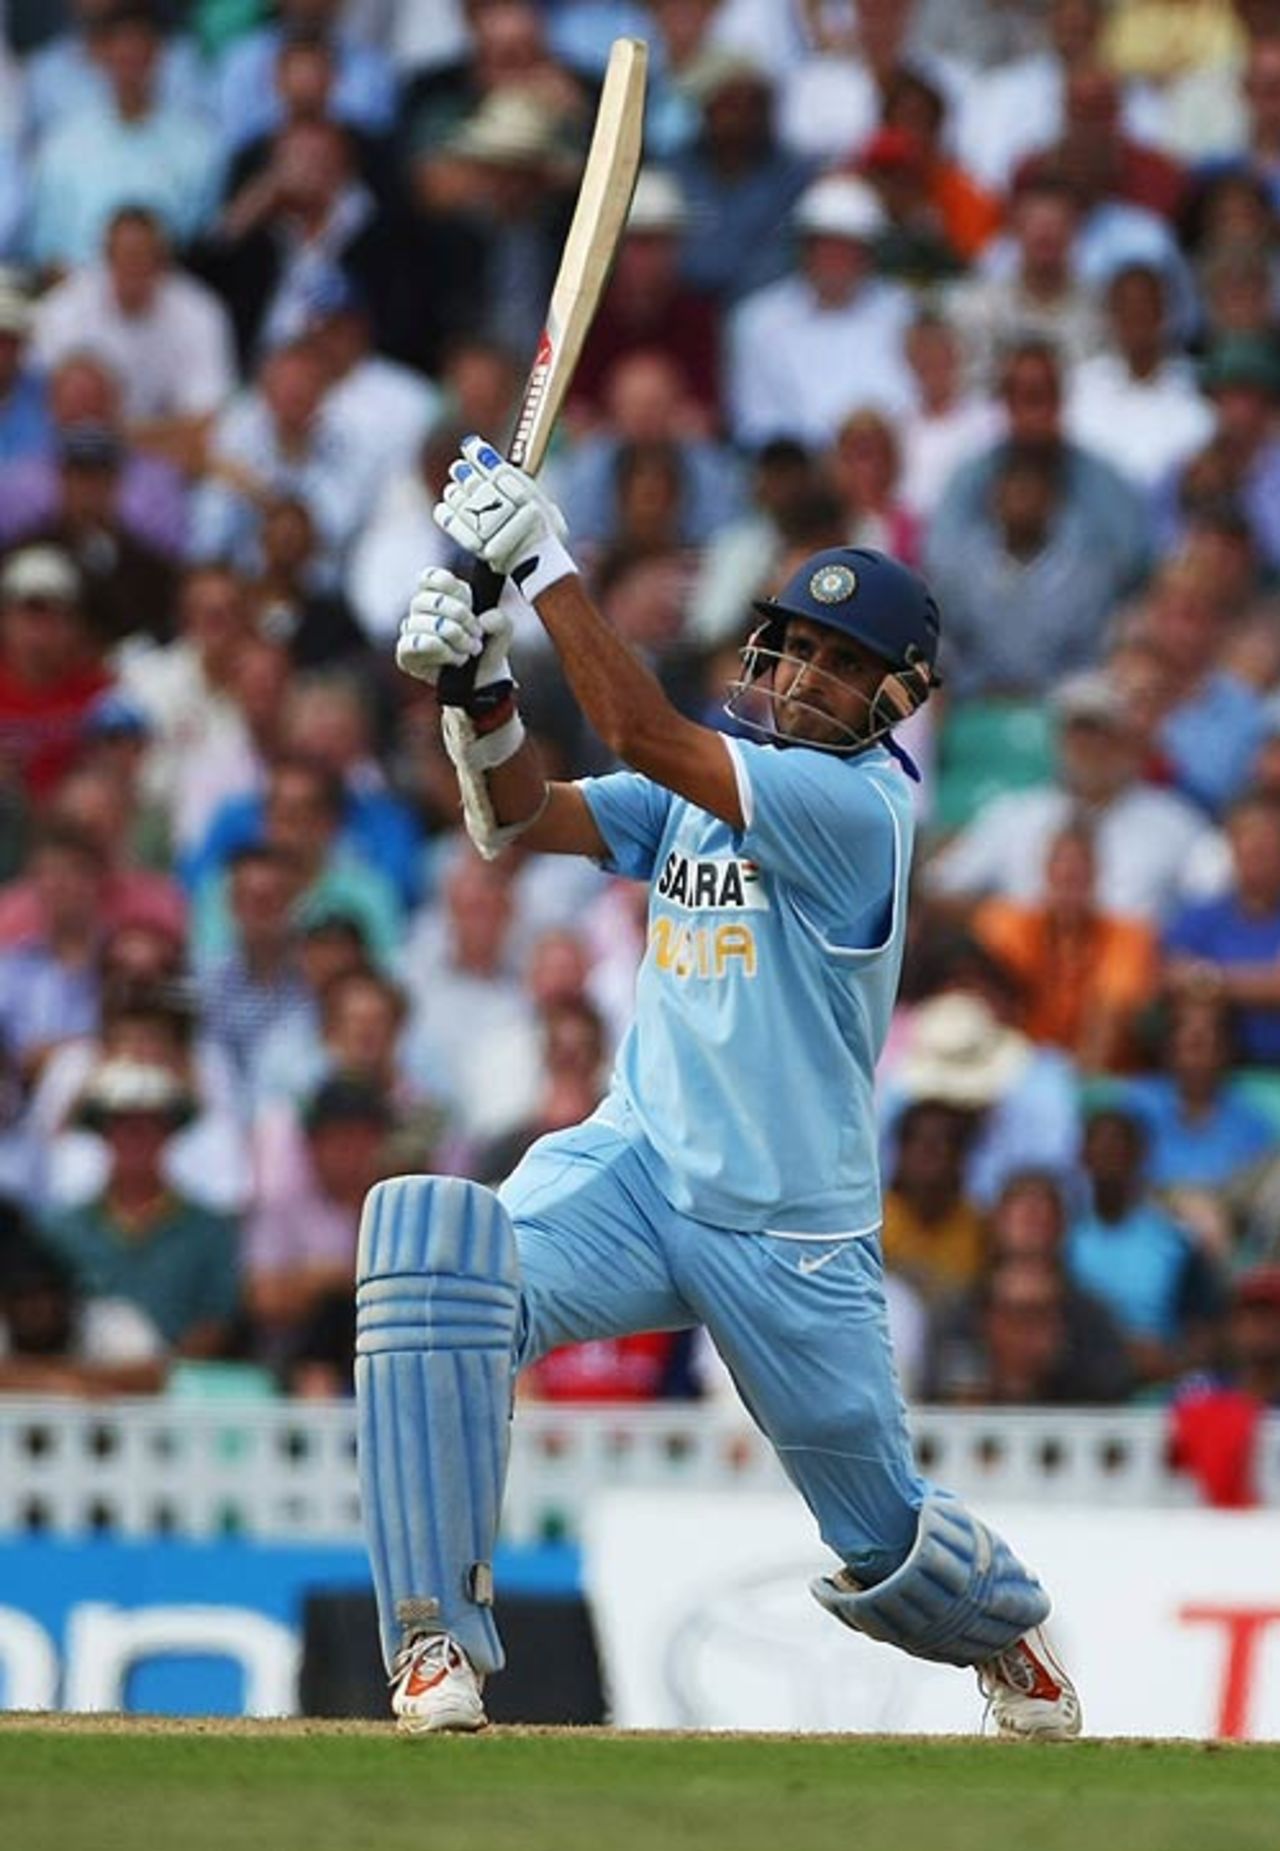 Sourav Ganguly gives room and smashes one over the bowler's head, England v India, 6th ODI, The Oval, September 5, 2007